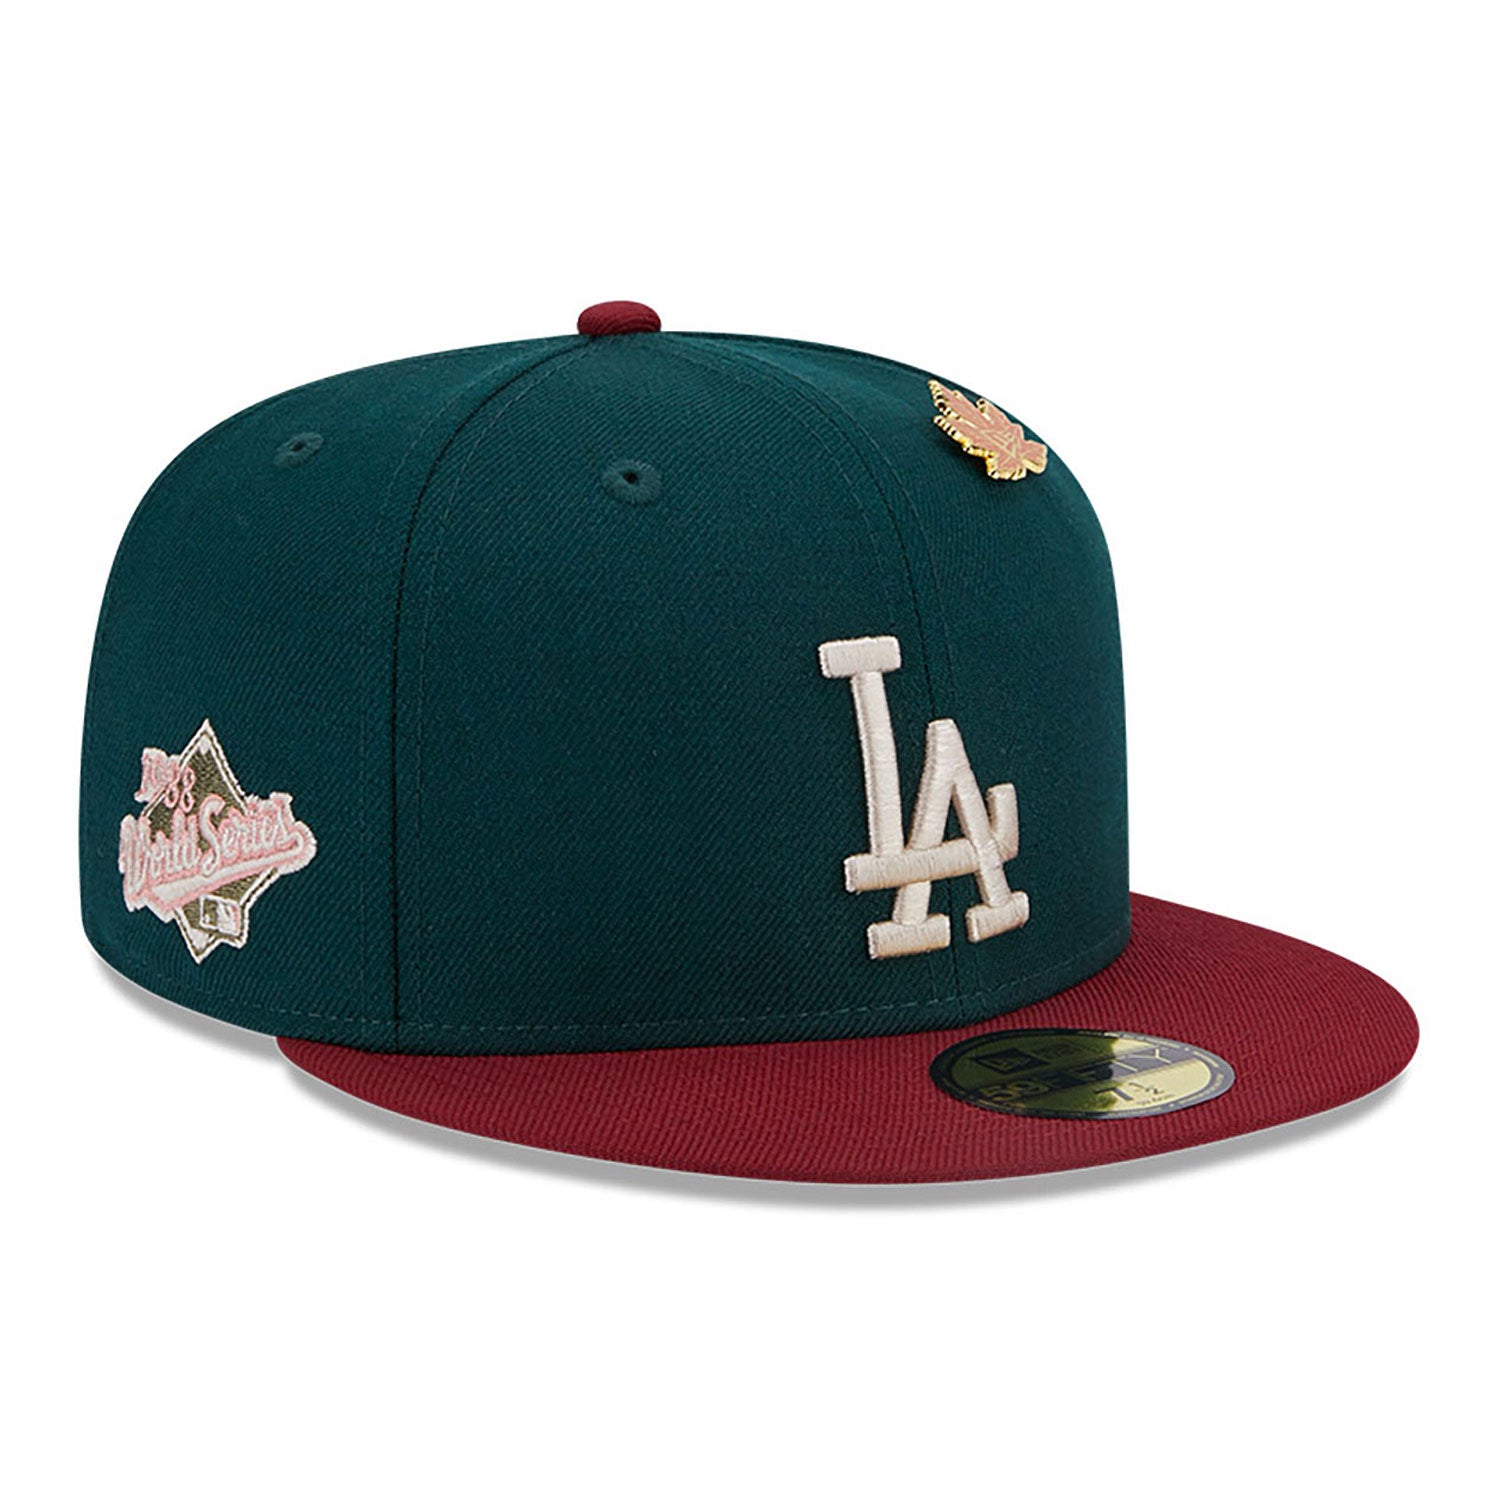 NEW ERA 59FIFTY MLB CONTRAST WORLD SERIES LOS ANGELES DODGERS TWO TONE / GREY UV FITTED CAP